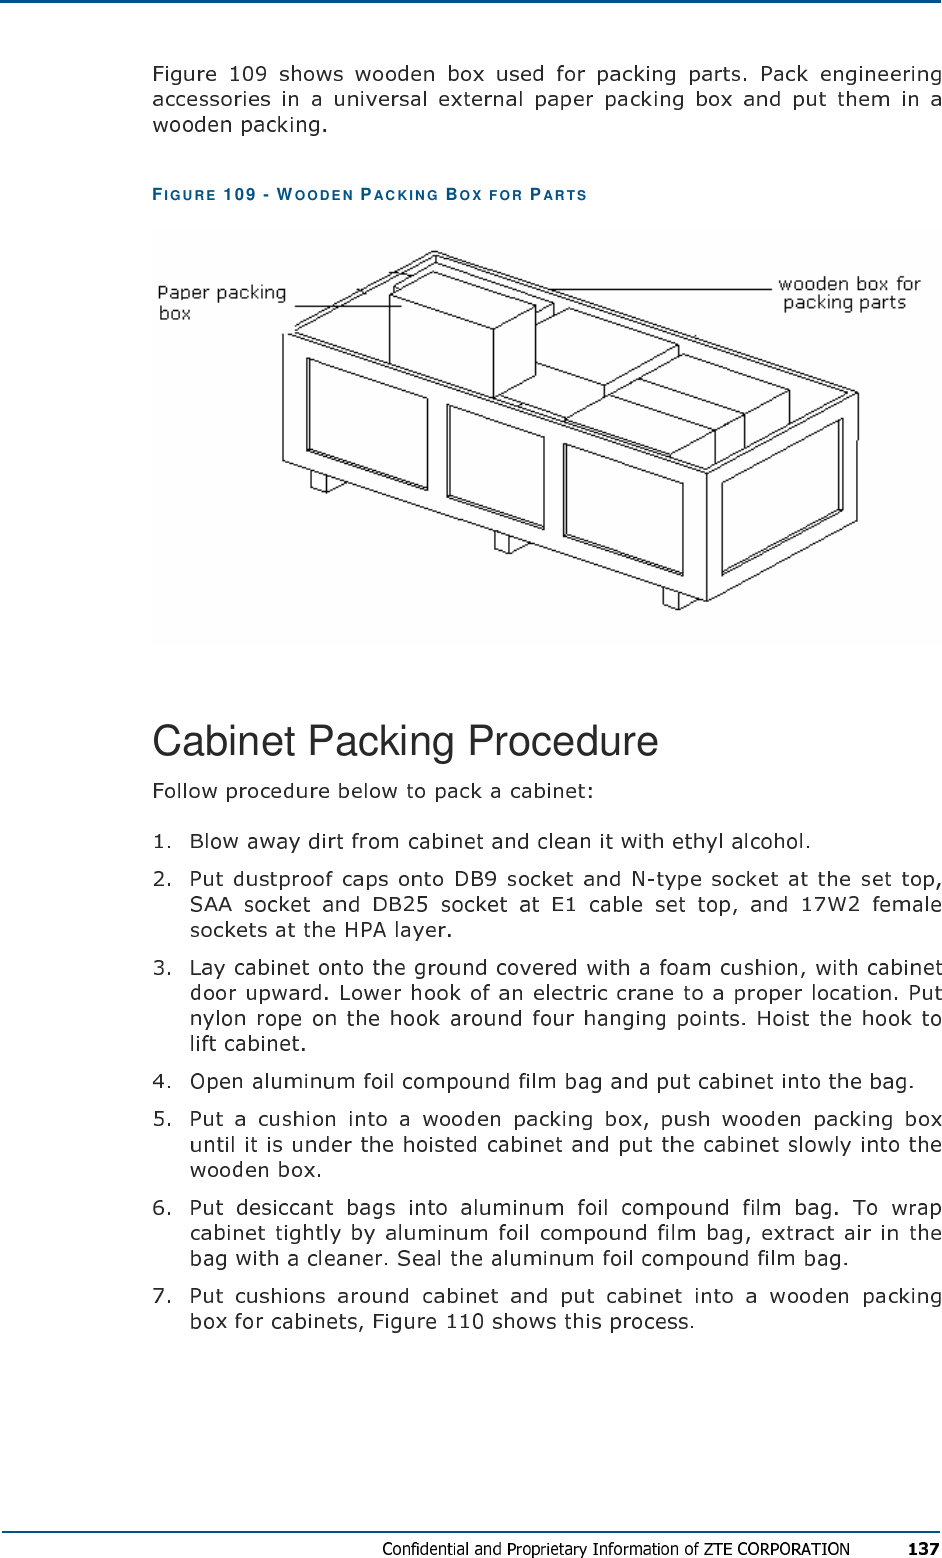 FIG U R E   109 - WOOD E N   PAC KI N G   BO X  F O R   PA R T S  Cabinet Packing Procedure        